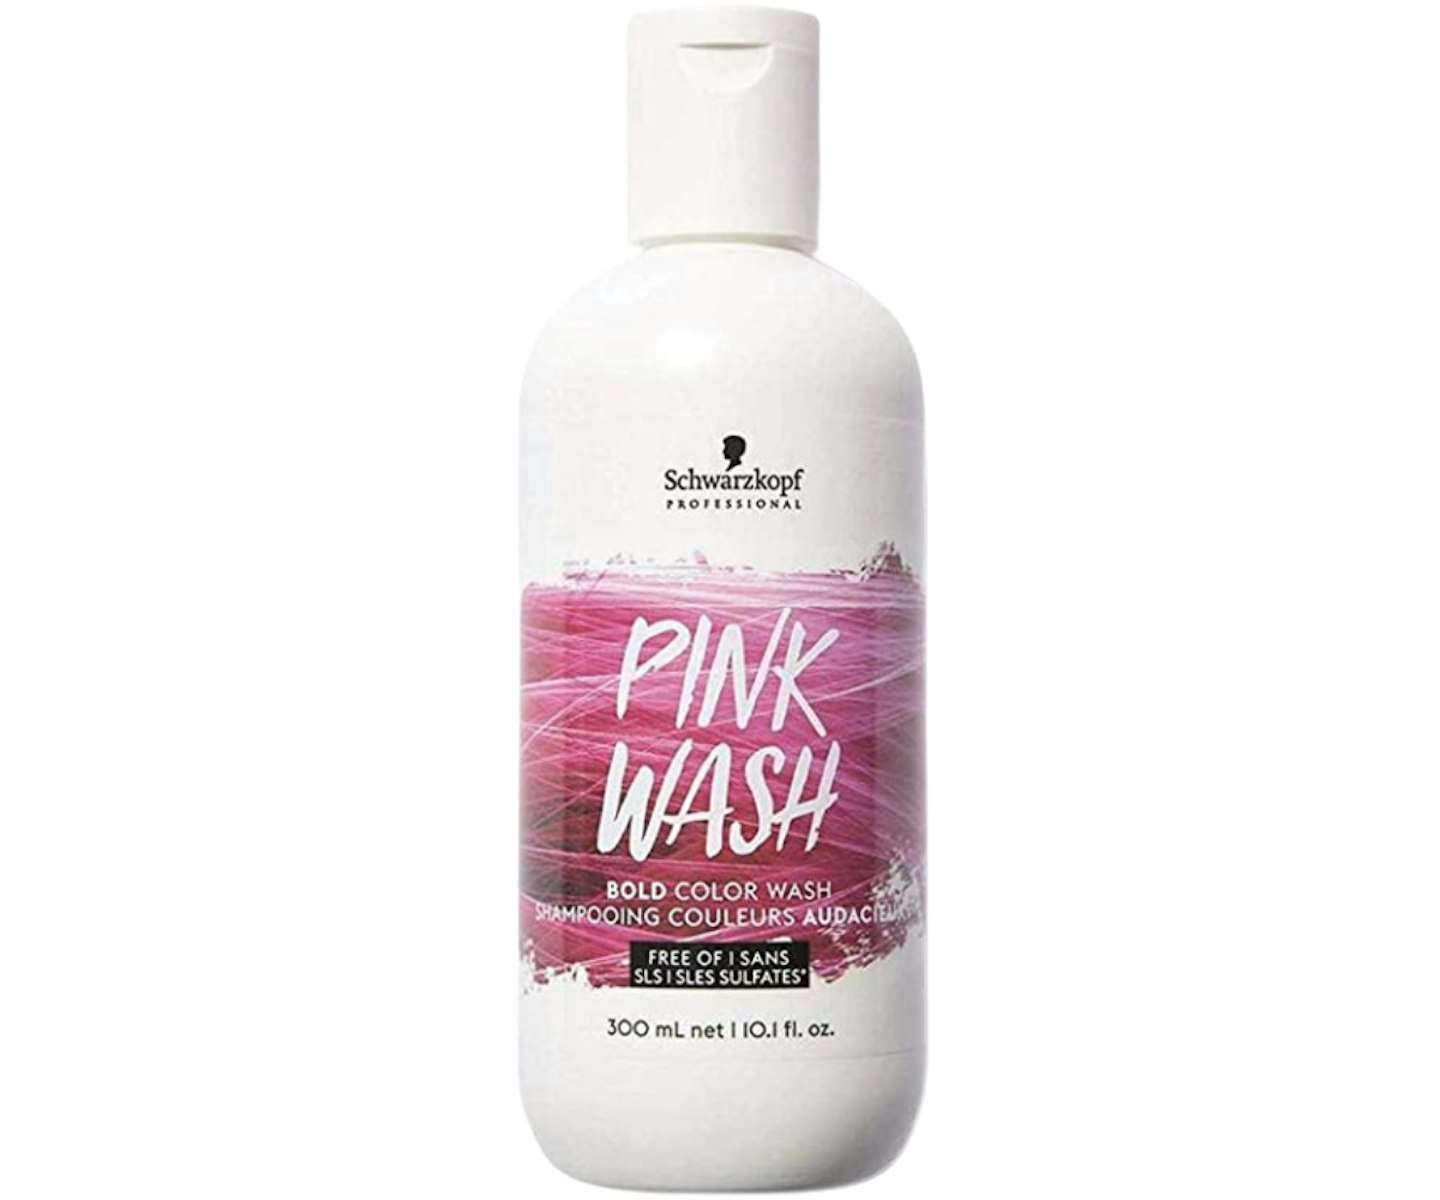 A picture of the Schwarzkopf Bold Colour Wash Pink Shampoo